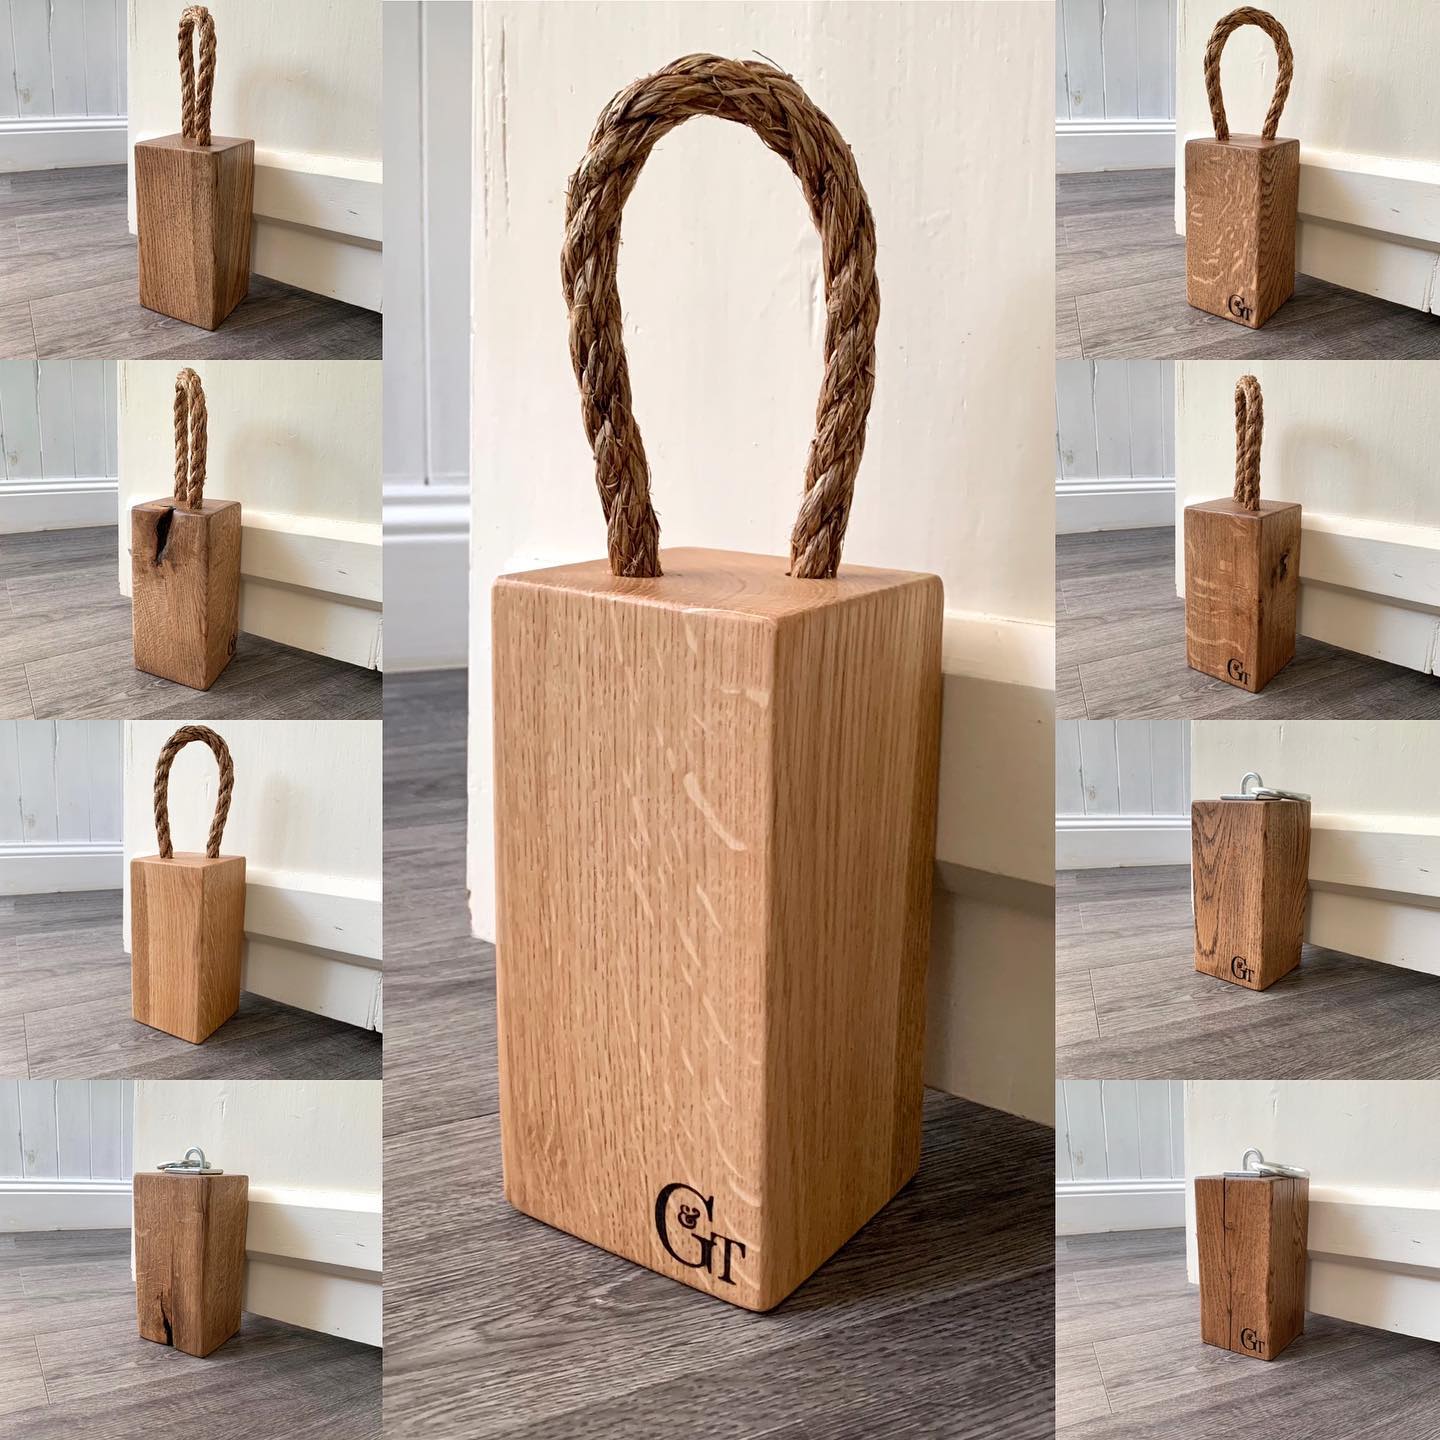 A selection of Extra character and standard oak doorstops are now back in stock!.#shoponline #shopsmall #shophandmade #madeinwiltshire #madeintheuk